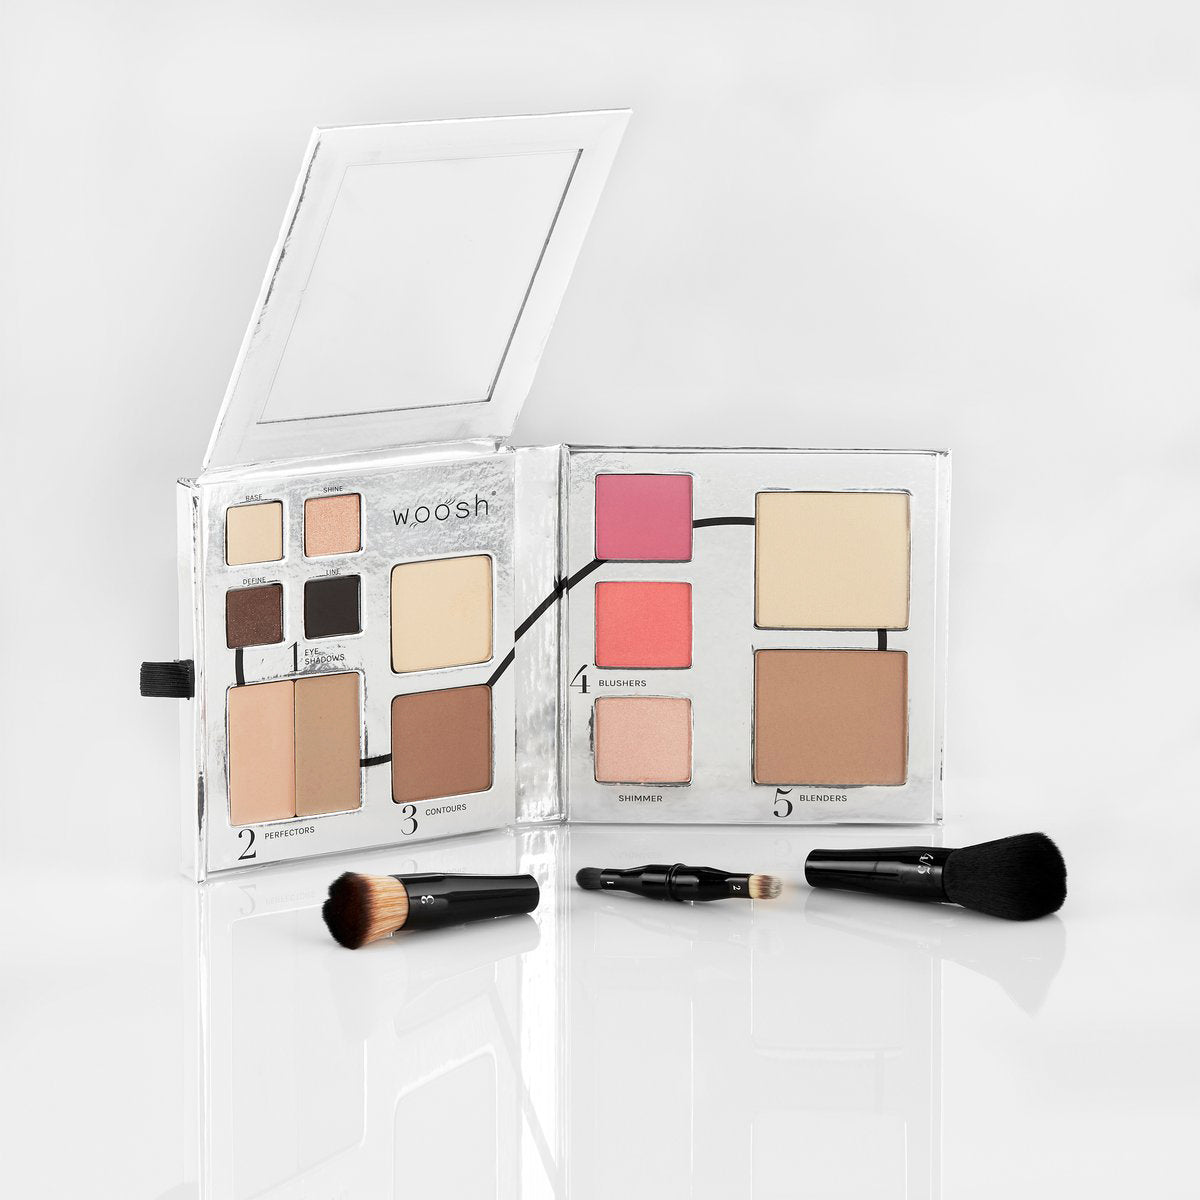 Fold out face palette with step by step instruction of how to apply makeup. It features four eyeshadows, 2 shades of creamy concealers, 2 contour powders in light and dark shades, 2 blushes in pink & coral, 2 shades of foundation powder and 1 shimmery highlighter. Includes secret collapsable brush set